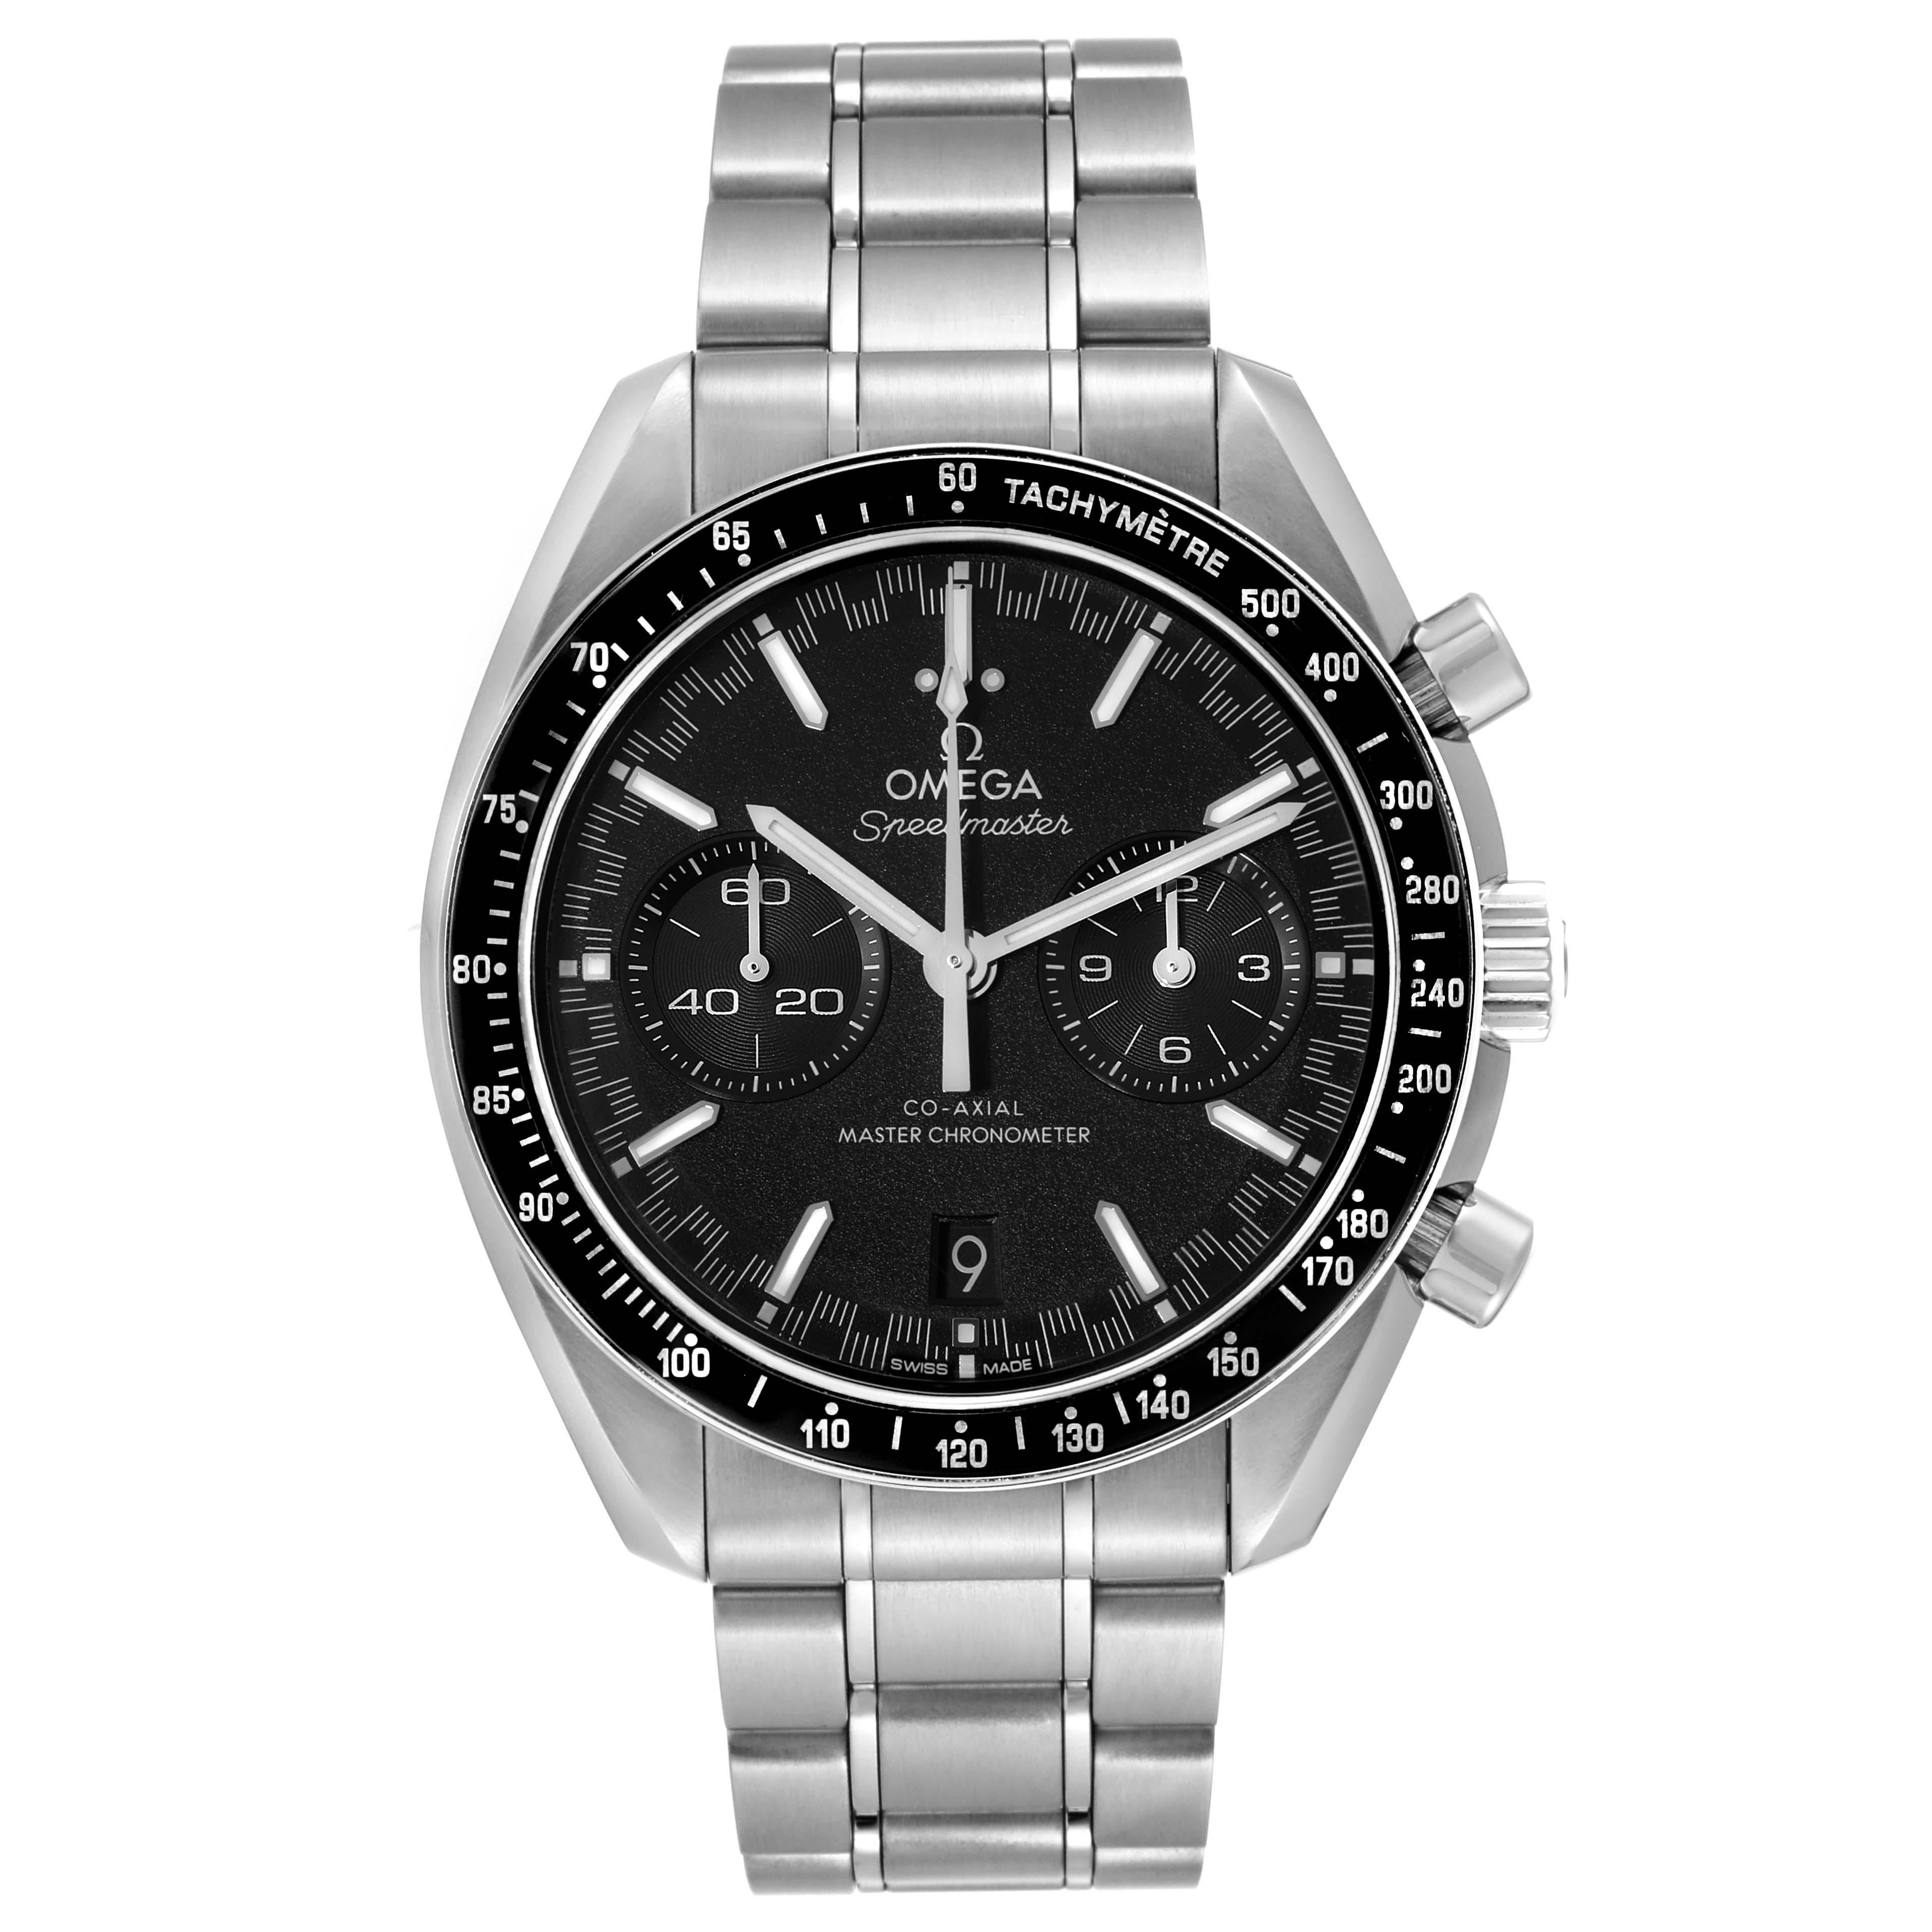 Omega Speedmaster Racing Co-Axial 44 Steel Mens Watch 329.30.44.51.01.001. COSC-certified co-axial Omega automatic chronograph movement. Stainless steel round case 44.25 mm in diameter with polished bevelled edges, pushers and crown. Exhibition